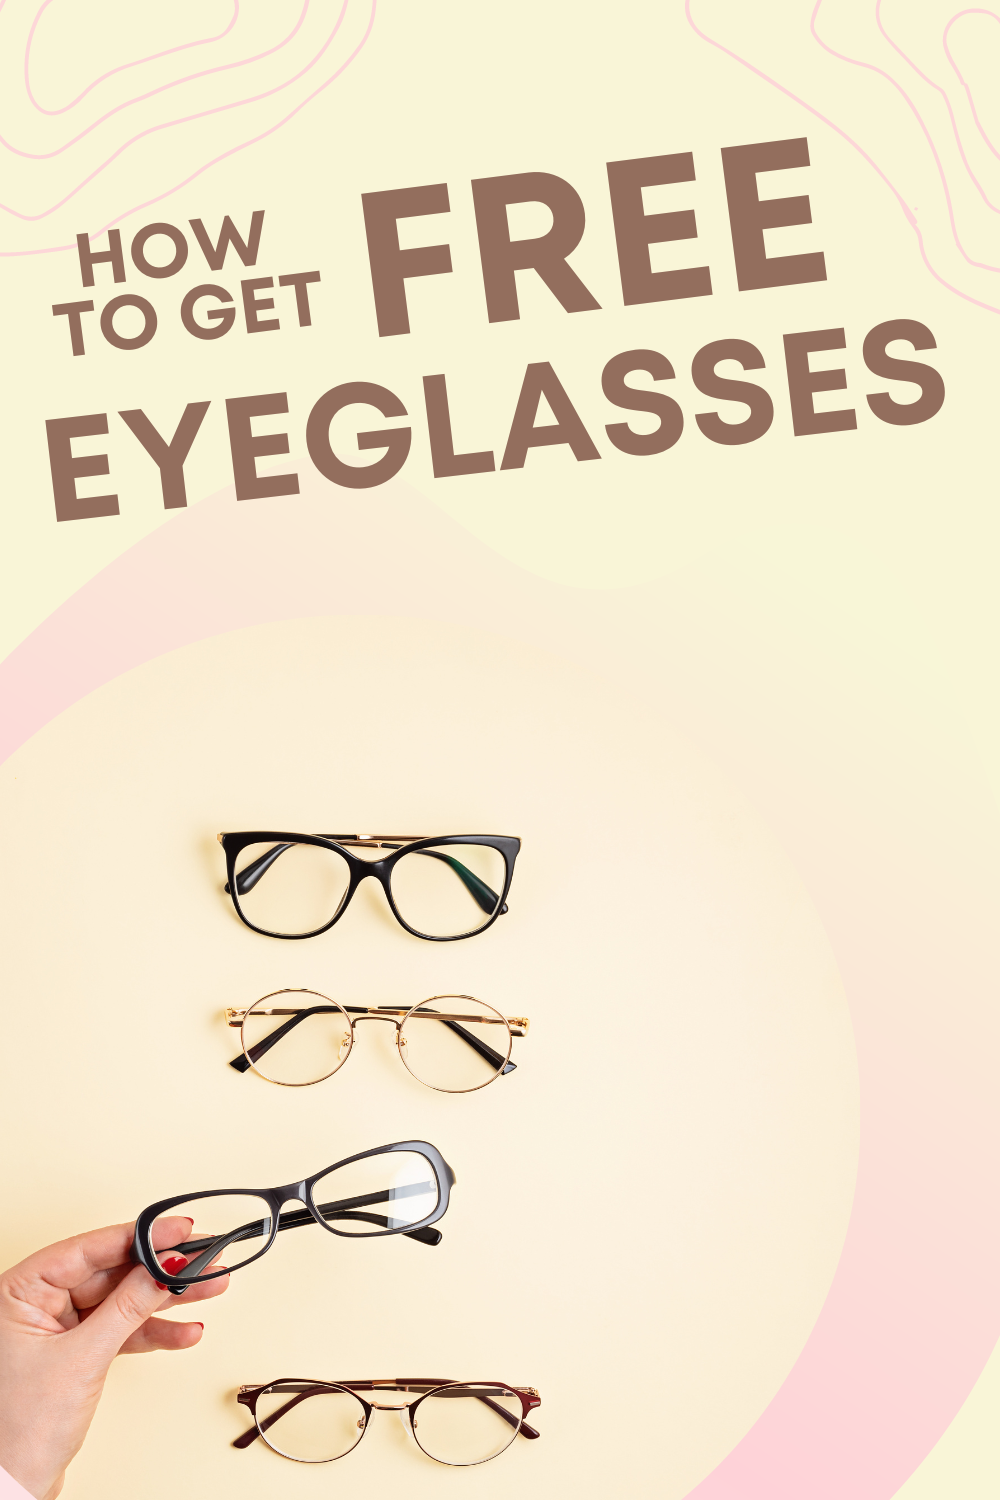 How To Get Free Eyeglasses